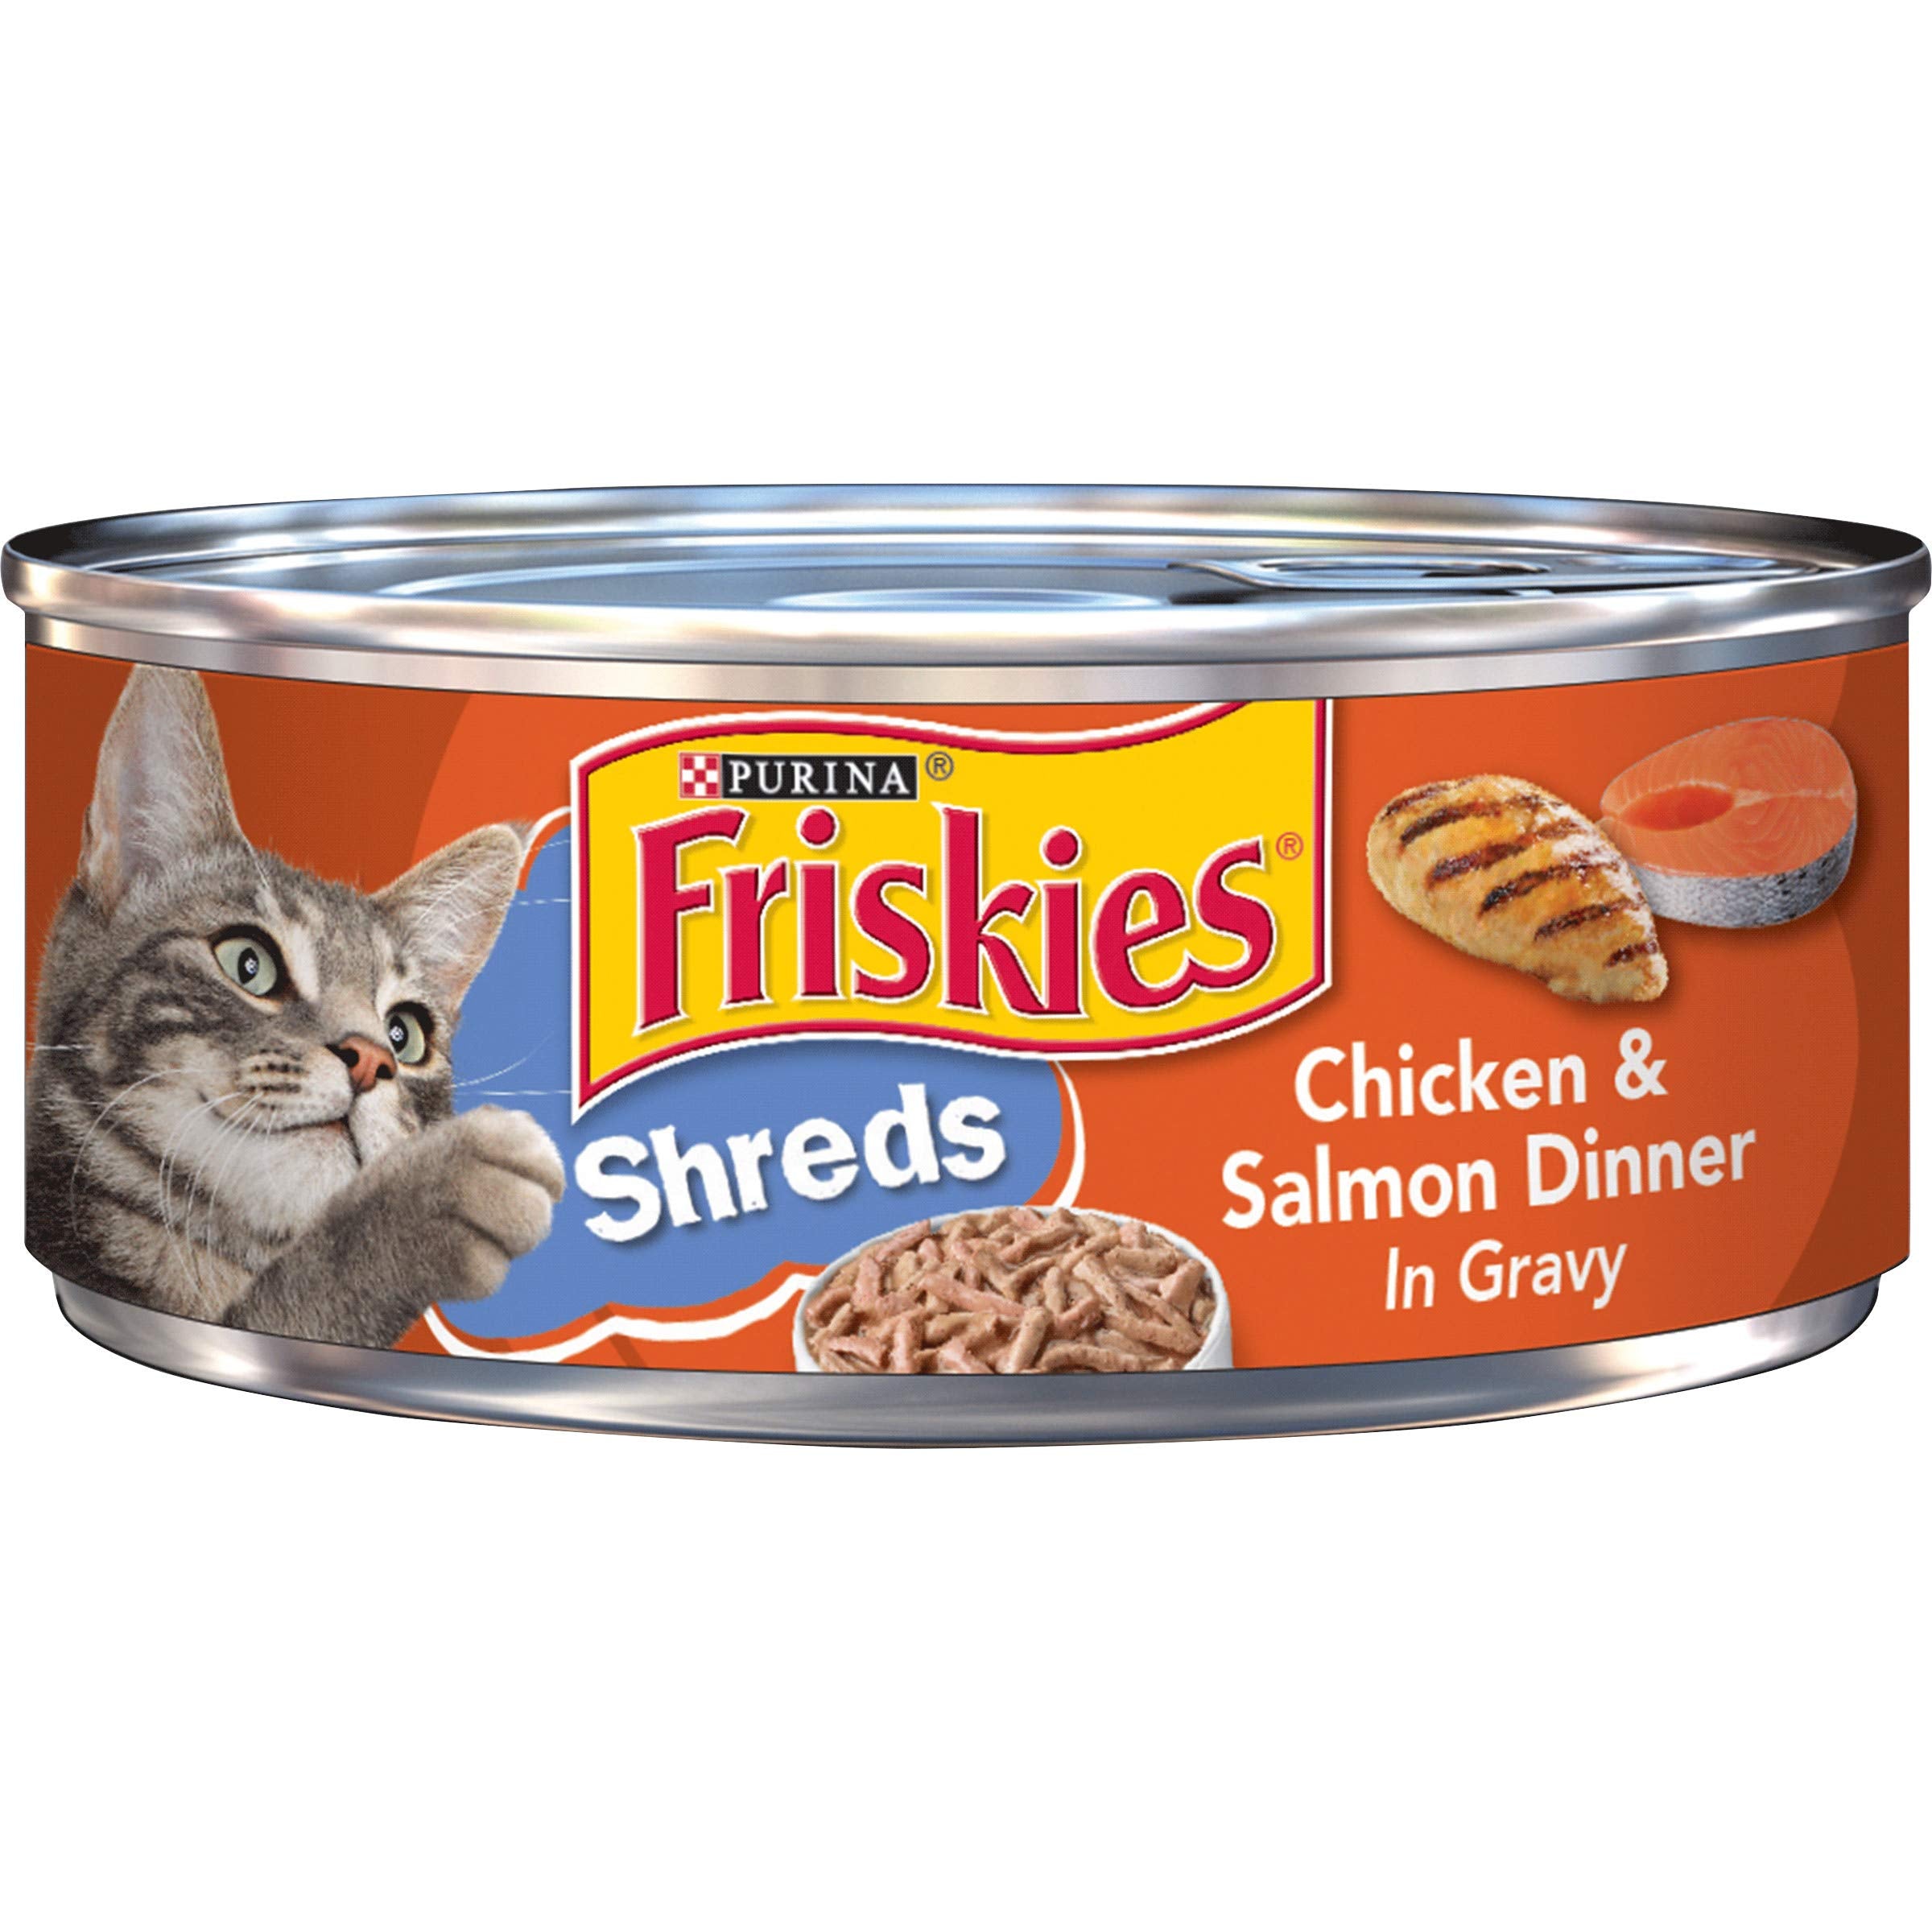 Purina Friskies Tuna Salmon Chicken and Whitefish Pate Canned Cat Food - Variety Pack - 5.5 Oz - Case of 40  